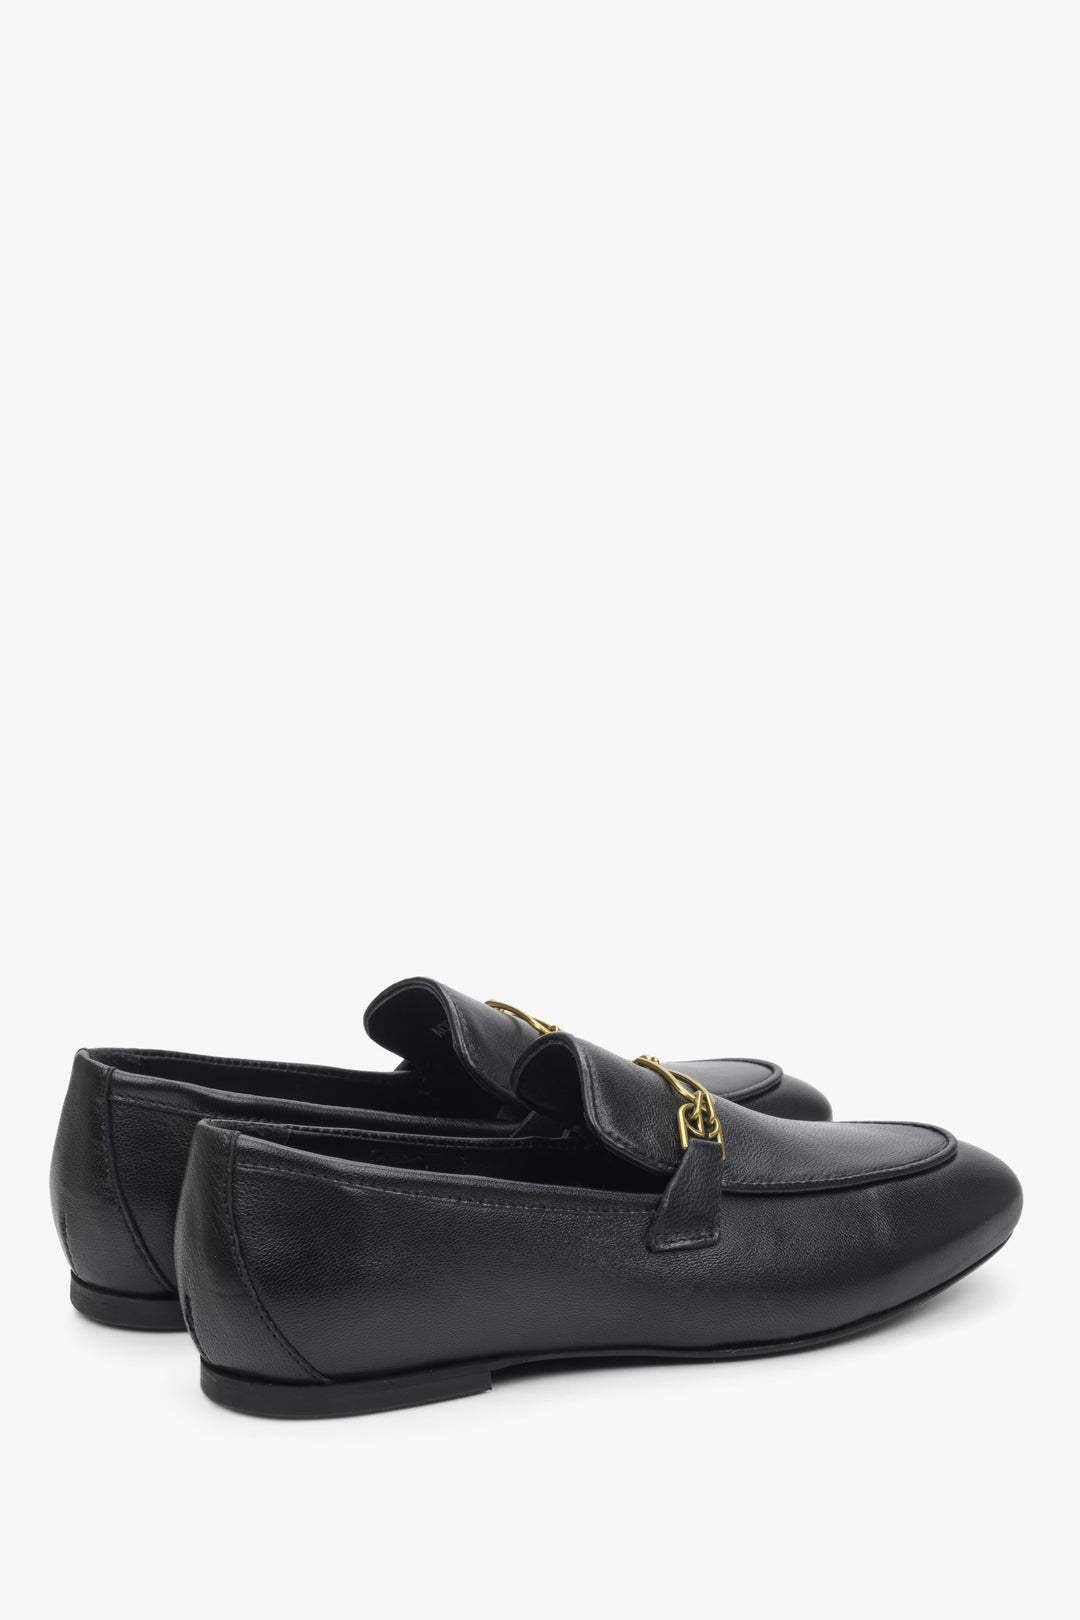 Women's black loafers Estro - a close-up on heel coubter and shoe's sideline